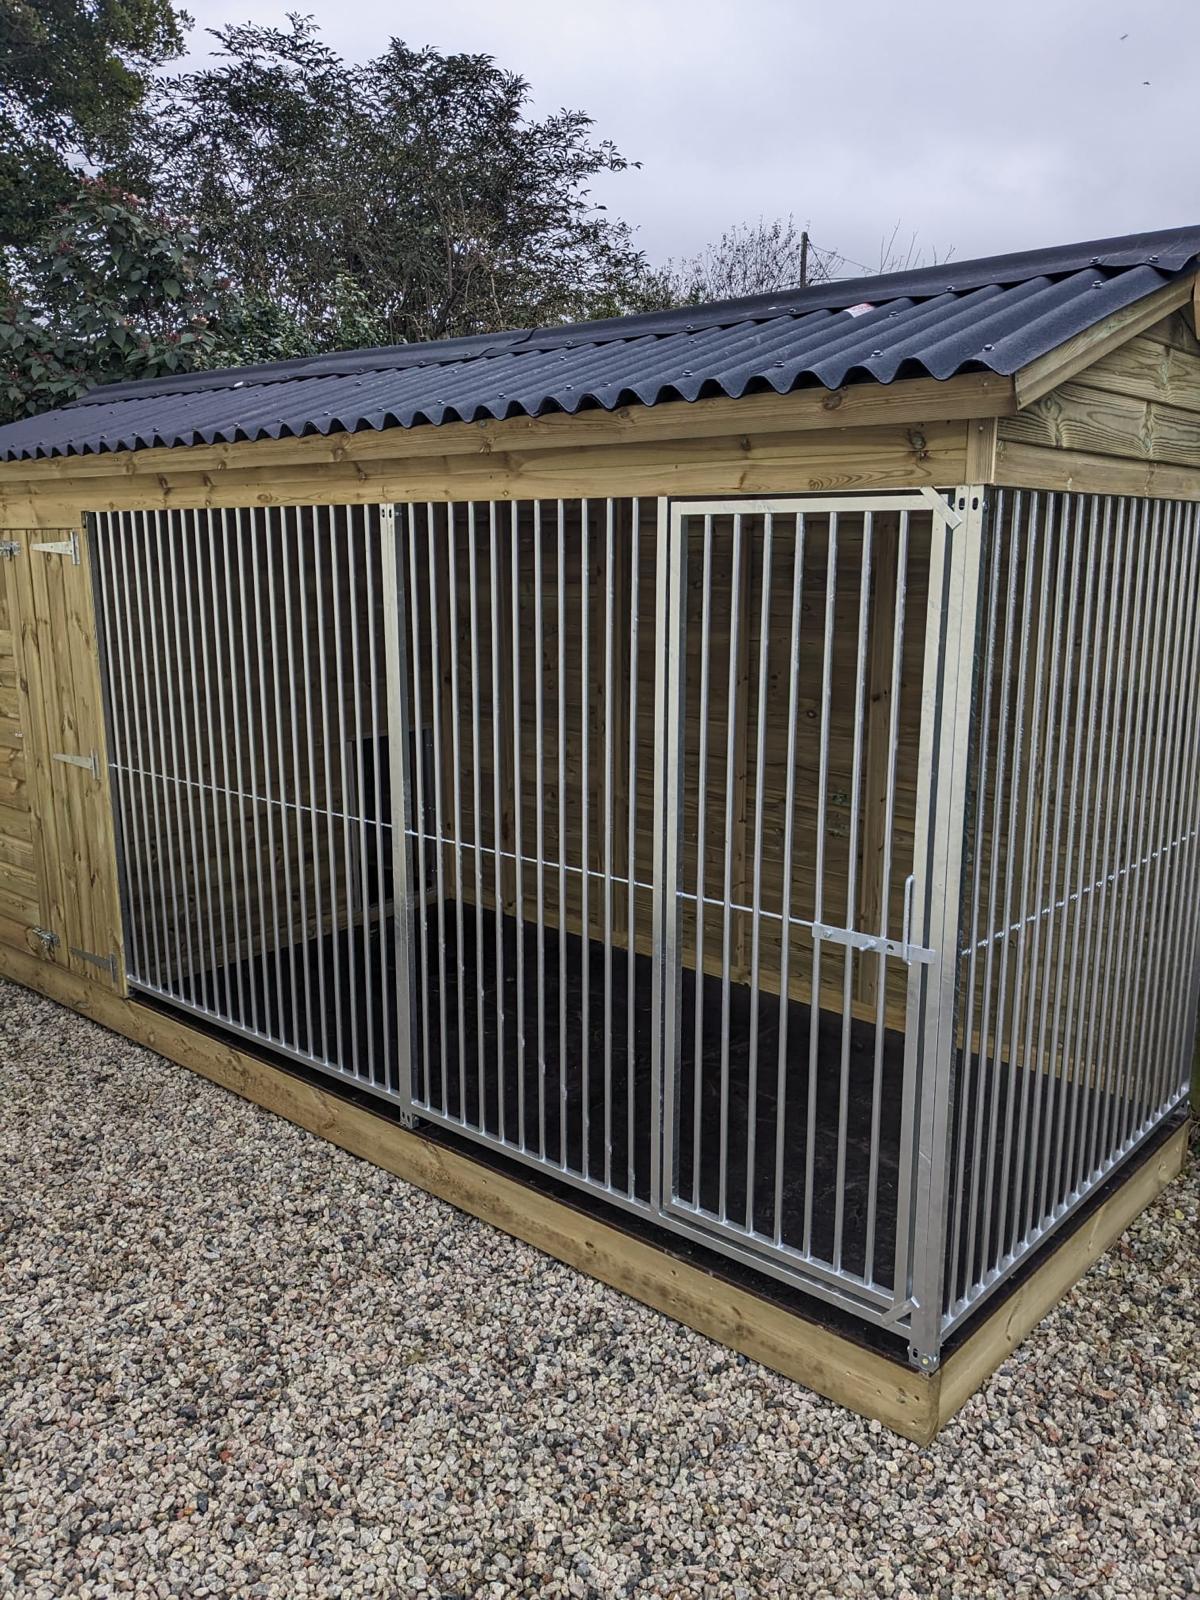 Windermere Wooden Dog Kennel And Run 10'6ft (wide) x 5ft (depth) x 6'6ft (apex)